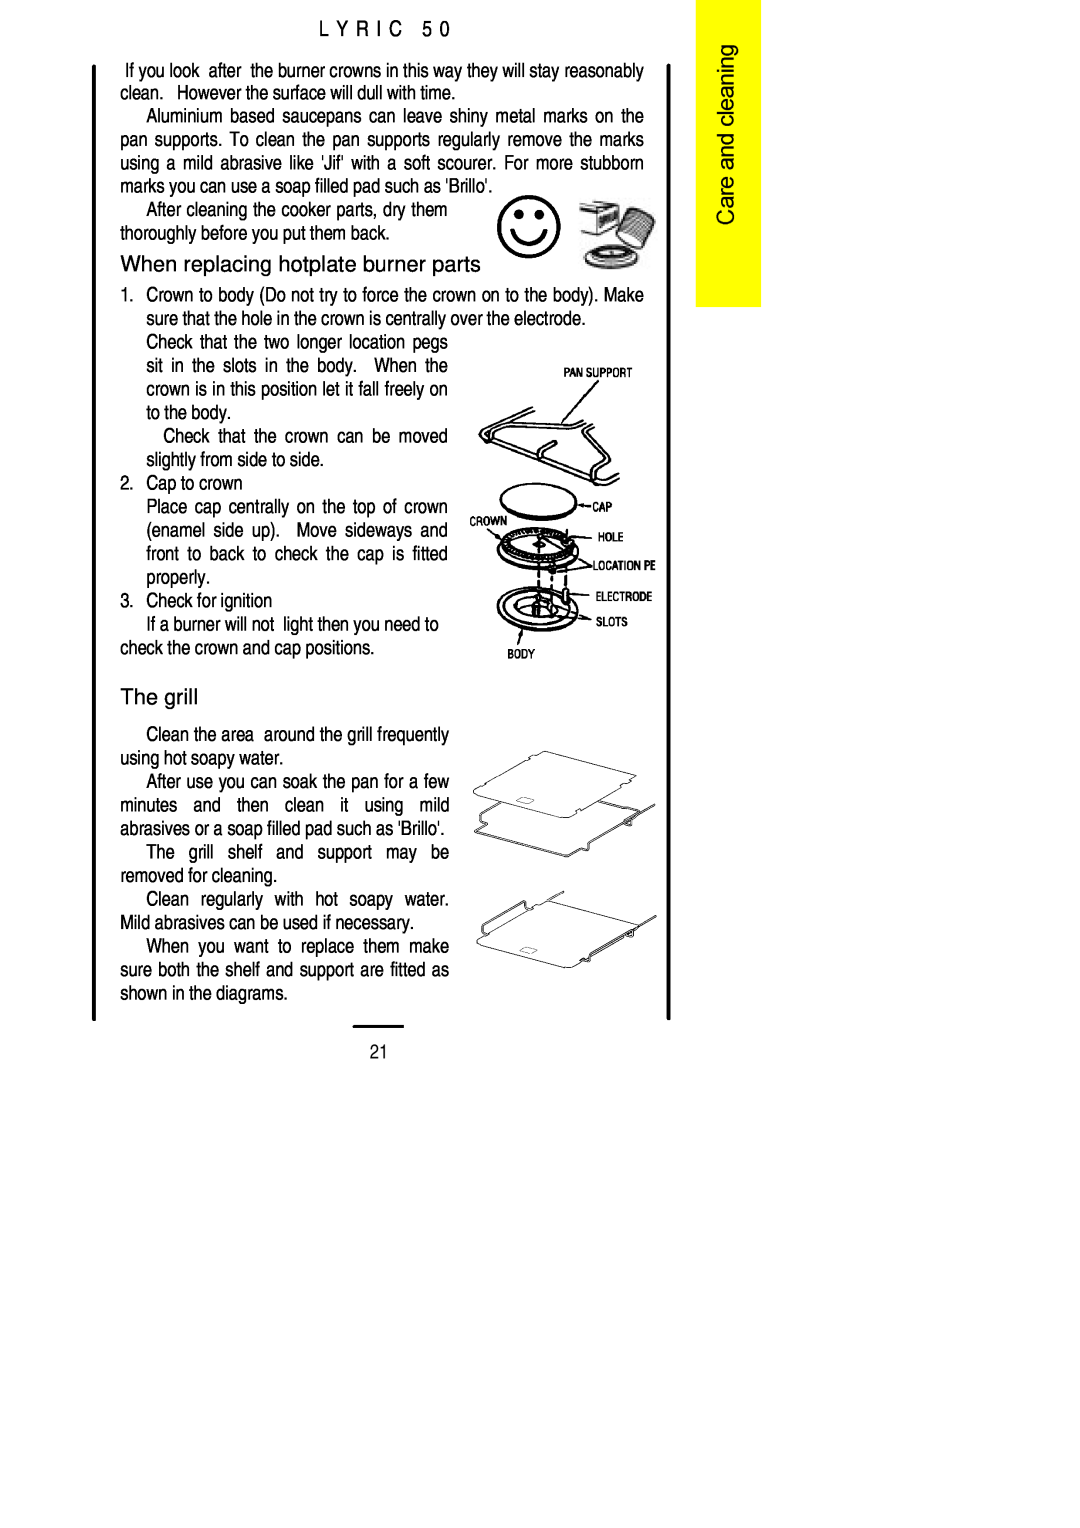 Electrolux LYRIC50 installation instructions When replacing hotplate burner parts, The grill, L Y R I C 